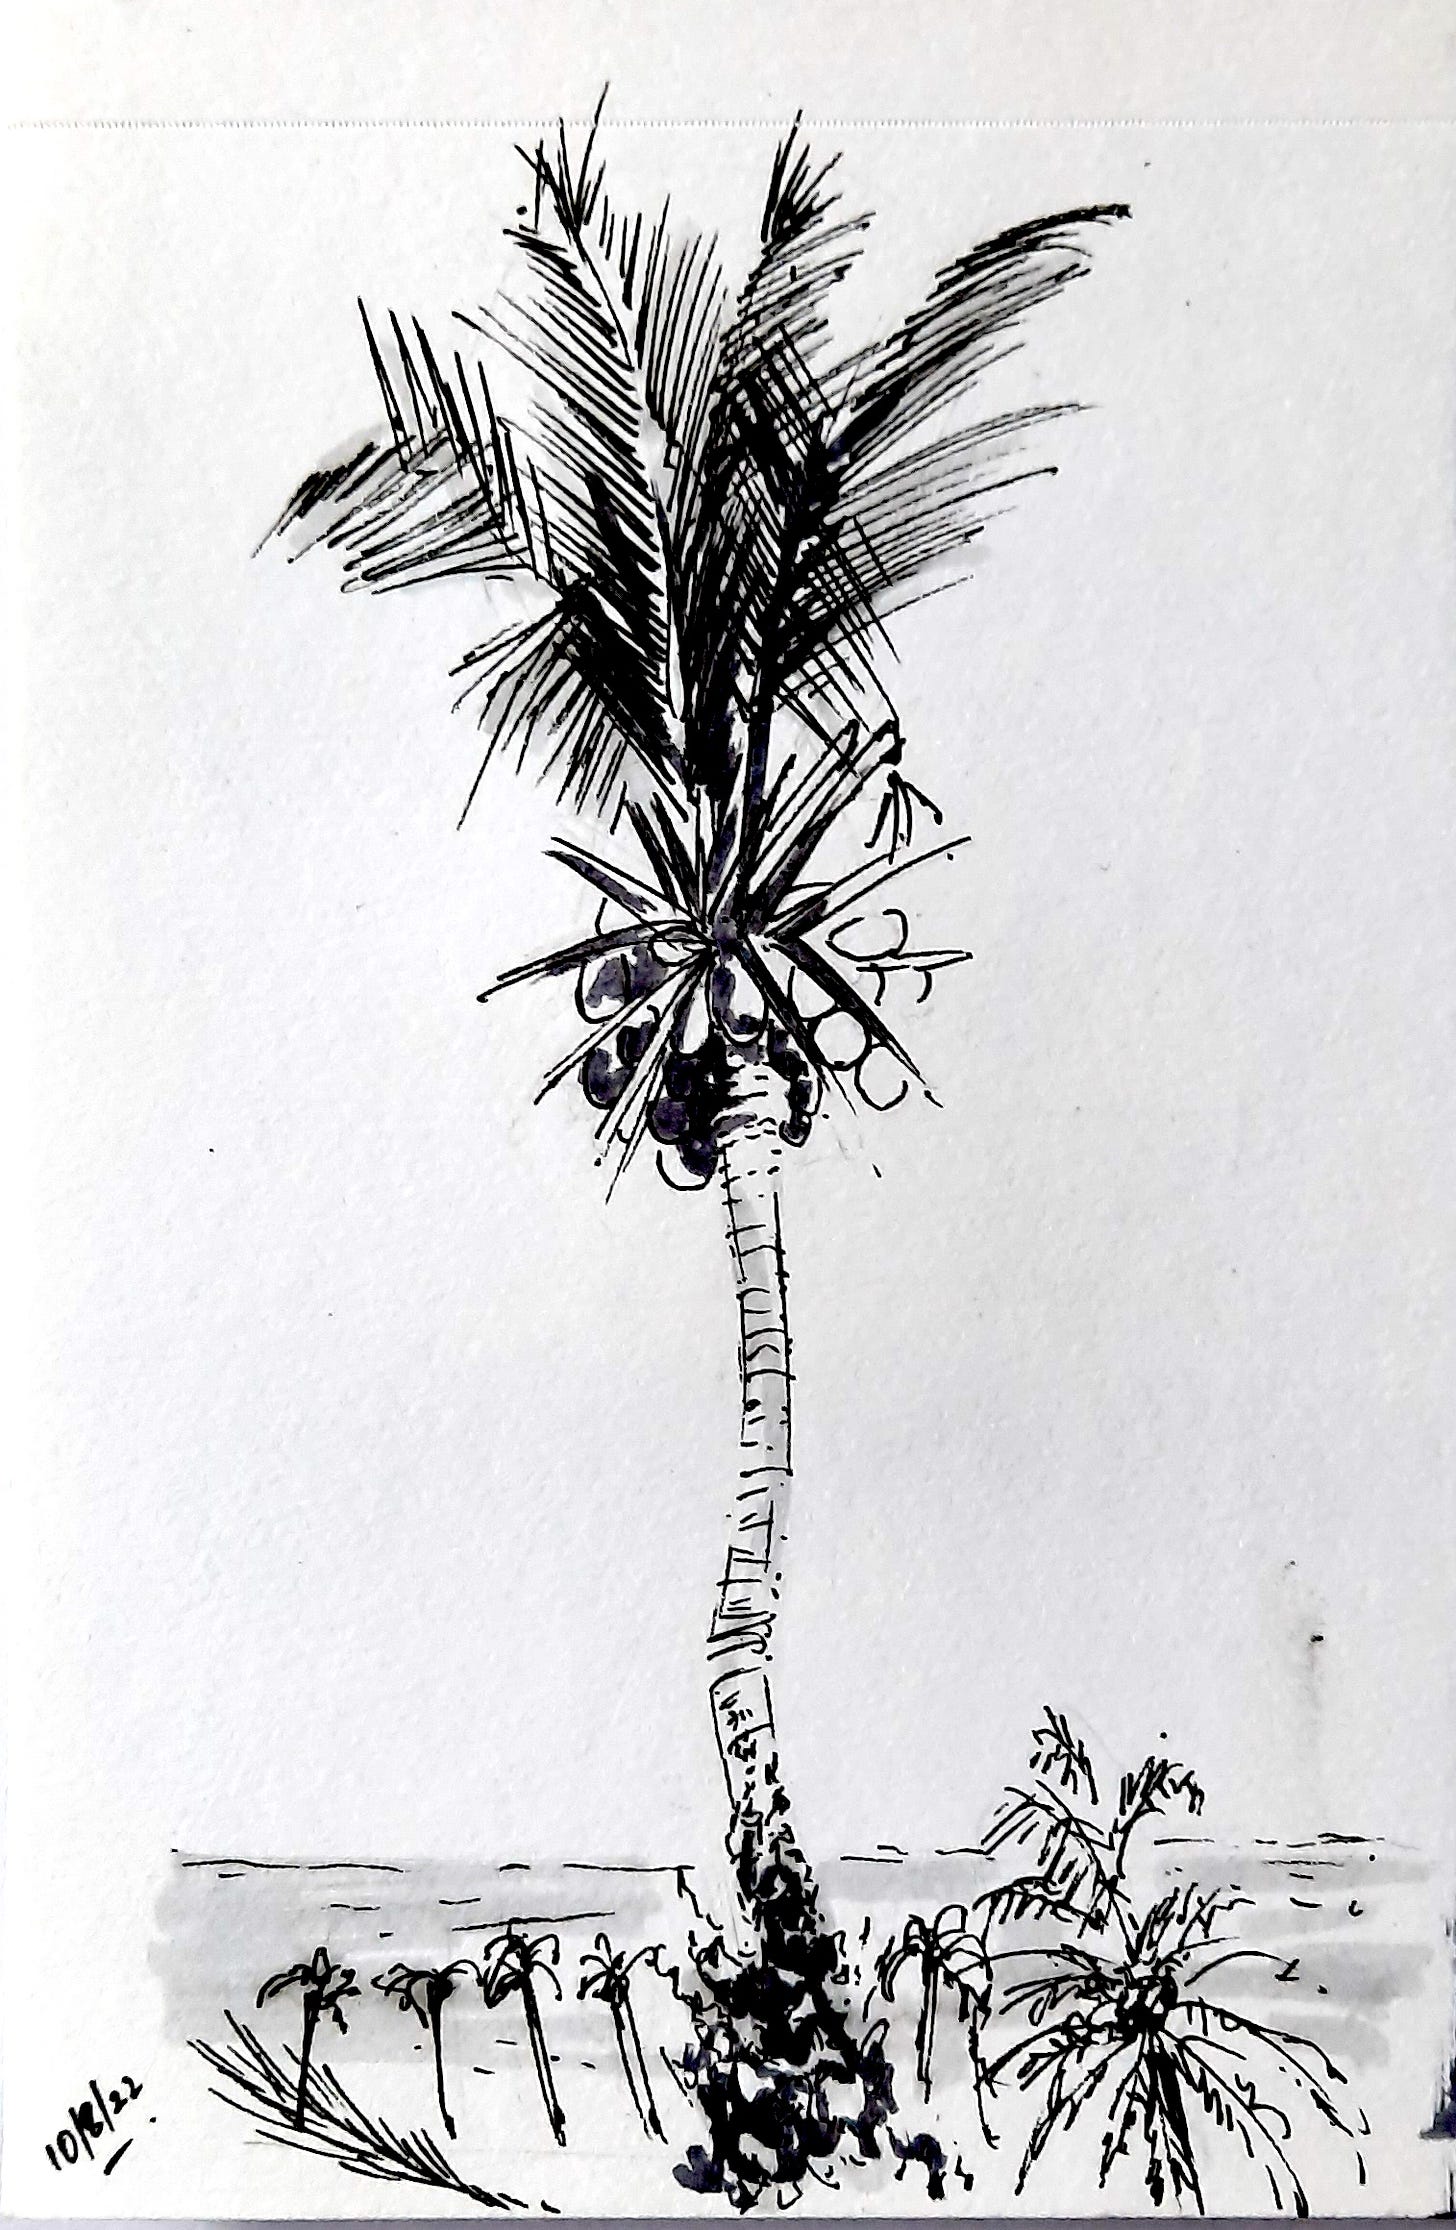 The crooked coconut tree at Kovalam